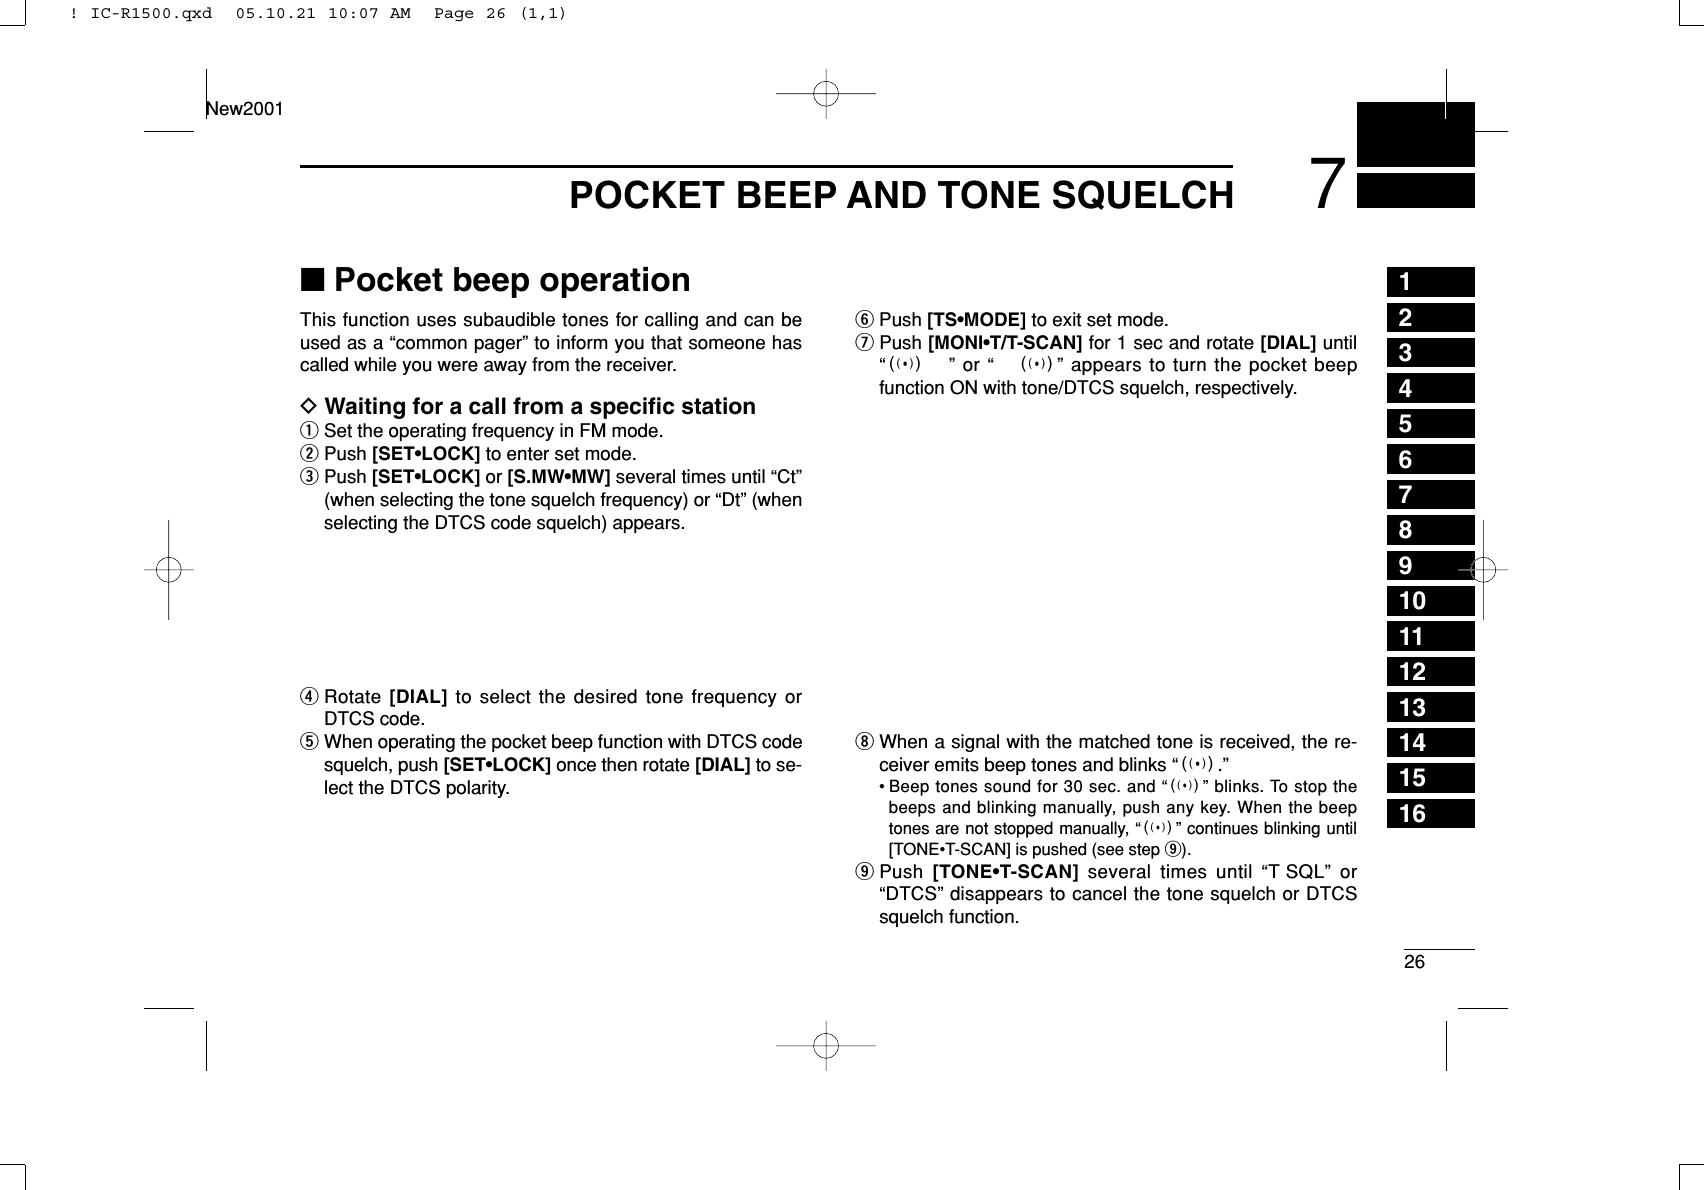 267POCKET BEEP AND TONE SQUELCH12345678910111213141516New2001■Pocket beep operationThis function uses subaudible tones for calling and can beused as a “common pager” to inform you that someone hascalled while you were away from the receiver.DWaiting for a call from a speciﬁc stationqSet the operating frequency in FM mode.wPush [SET•LOCK] to enter set mode.ePush [SET•LOCK] or [S.MW•MW] several times until “Ct”(when selecting the tone squelch frequency) or “Dt” (whenselecting the DTCS code squelch) appears.rRotate [DIAL] to select the desired tone frequency orDTCS code.tWhen operating the pocket beep function with DTCS codesquelch, push [SET•LOCK] once then rotate [DIAL] to se-lect the DTCS polarity.yPush [TS•MODE] to exit set mode.uPush [MONI•T/T-SCAN] for 1 sec and rotate [DIAL] until“S” or “ S” appears to turn the pocket beepfunction ON with tone/DTCS squelch, respectively.iWhen a signal with the matched tone is received, the re-ceiver emits beep tones and blinks “S.”• Beep tones sound for 30 sec. and “S” blinks. To stop thebeeps and blinking manually, push any key. When the beeptones are not stopped manually, “S” continues blinking until[TONE•T-SCAN] is pushed (see step o).oPush  [TONE•T-SCAN] several times until “T SQL” or“DTCS” disappears to cancel the tone squelch or DTCSsquelch function.! IC-R1500.qxd  05.10.21 10:07 AM  Page 26 (1,1)